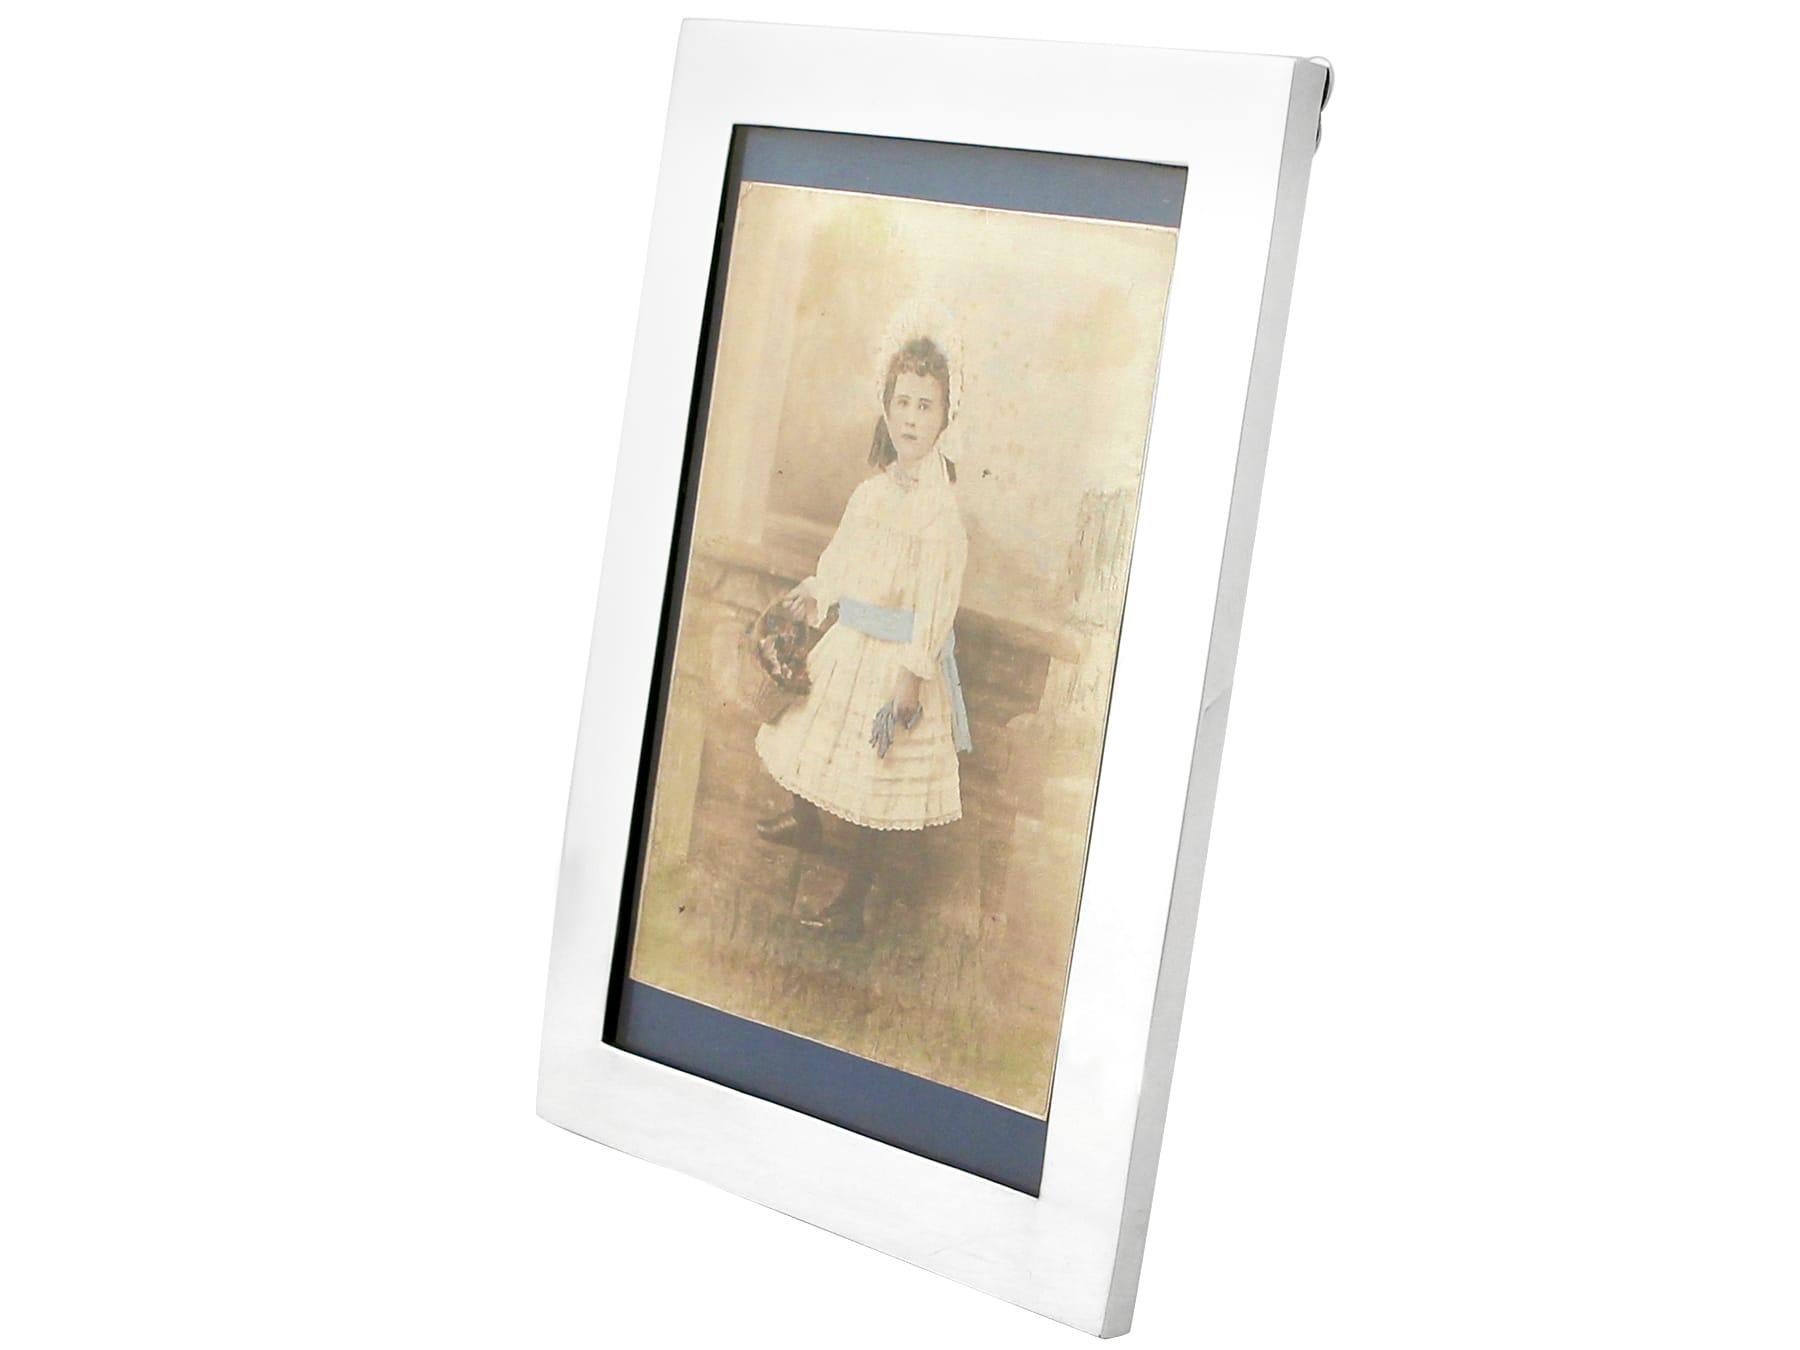 Antique 1918 Sterling Silver Photograph Frame In Excellent Condition For Sale In Jesmond, Newcastle Upon Tyne